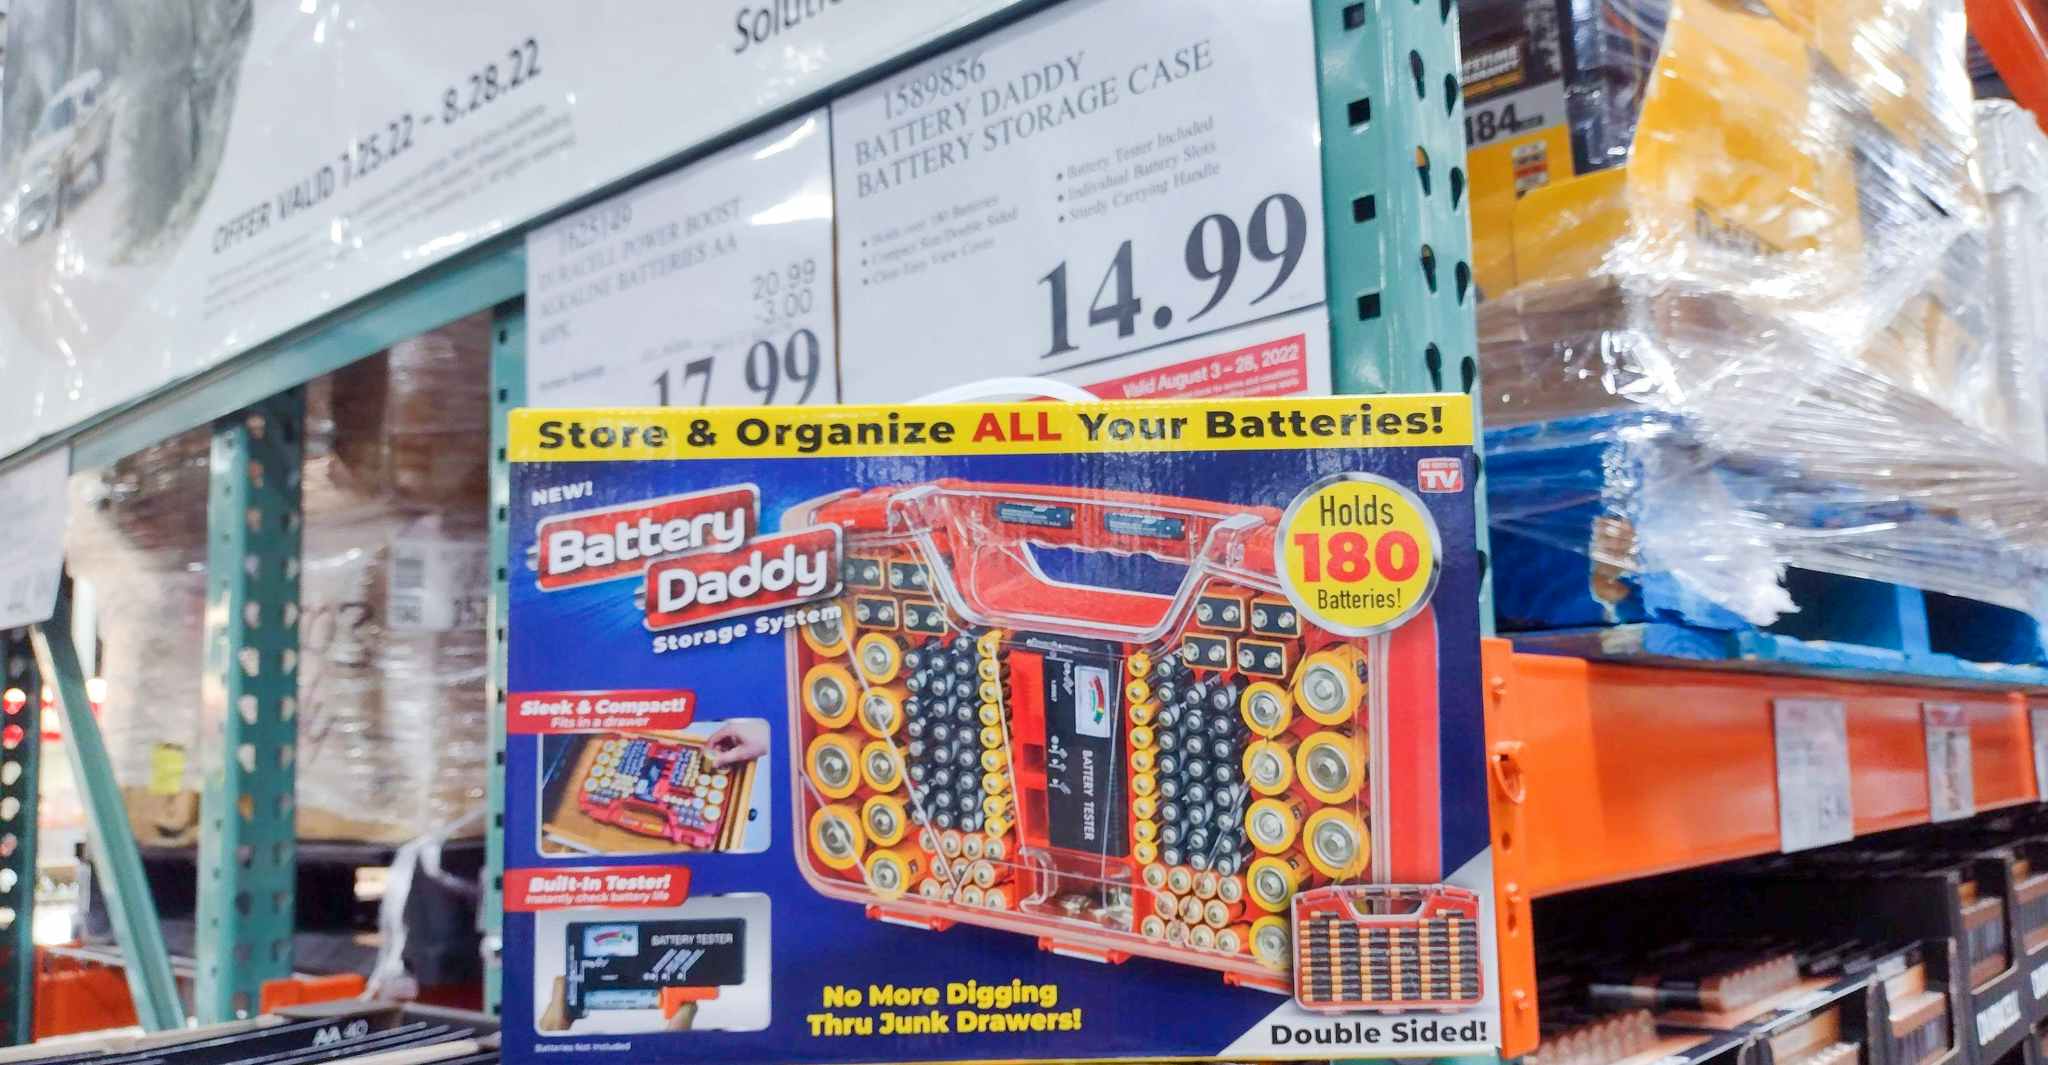 battery daddy storage case near sales sign at costco 